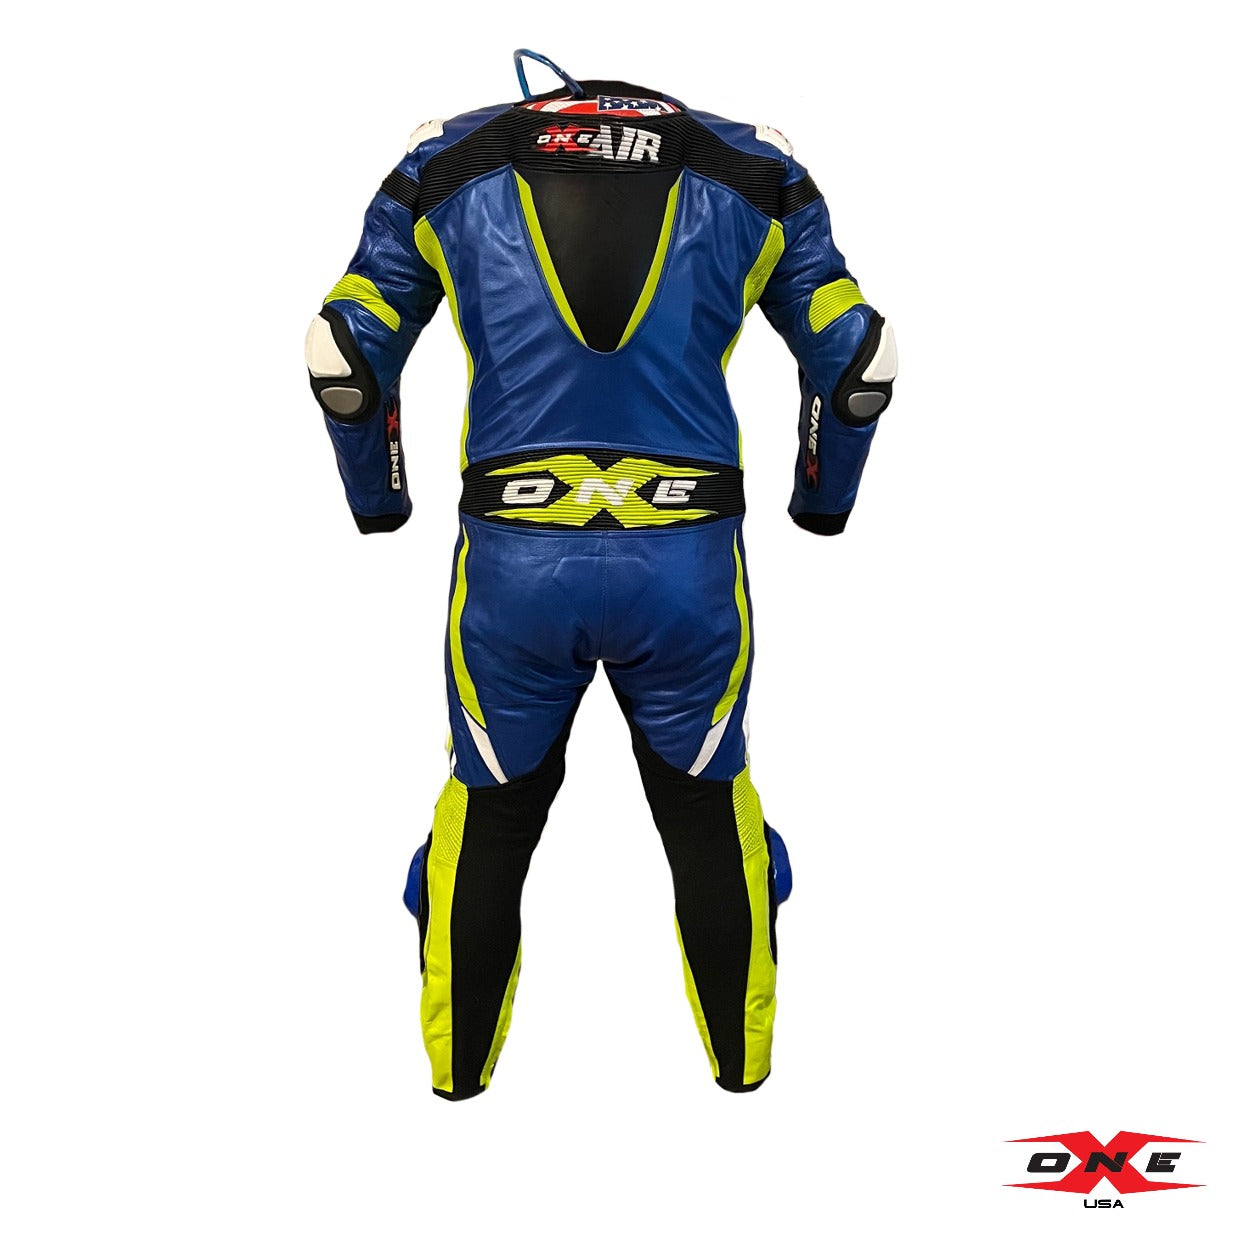 OneX USA XR22 Airbag Ready Pro Race Suit - Blue/Fluor Yellow